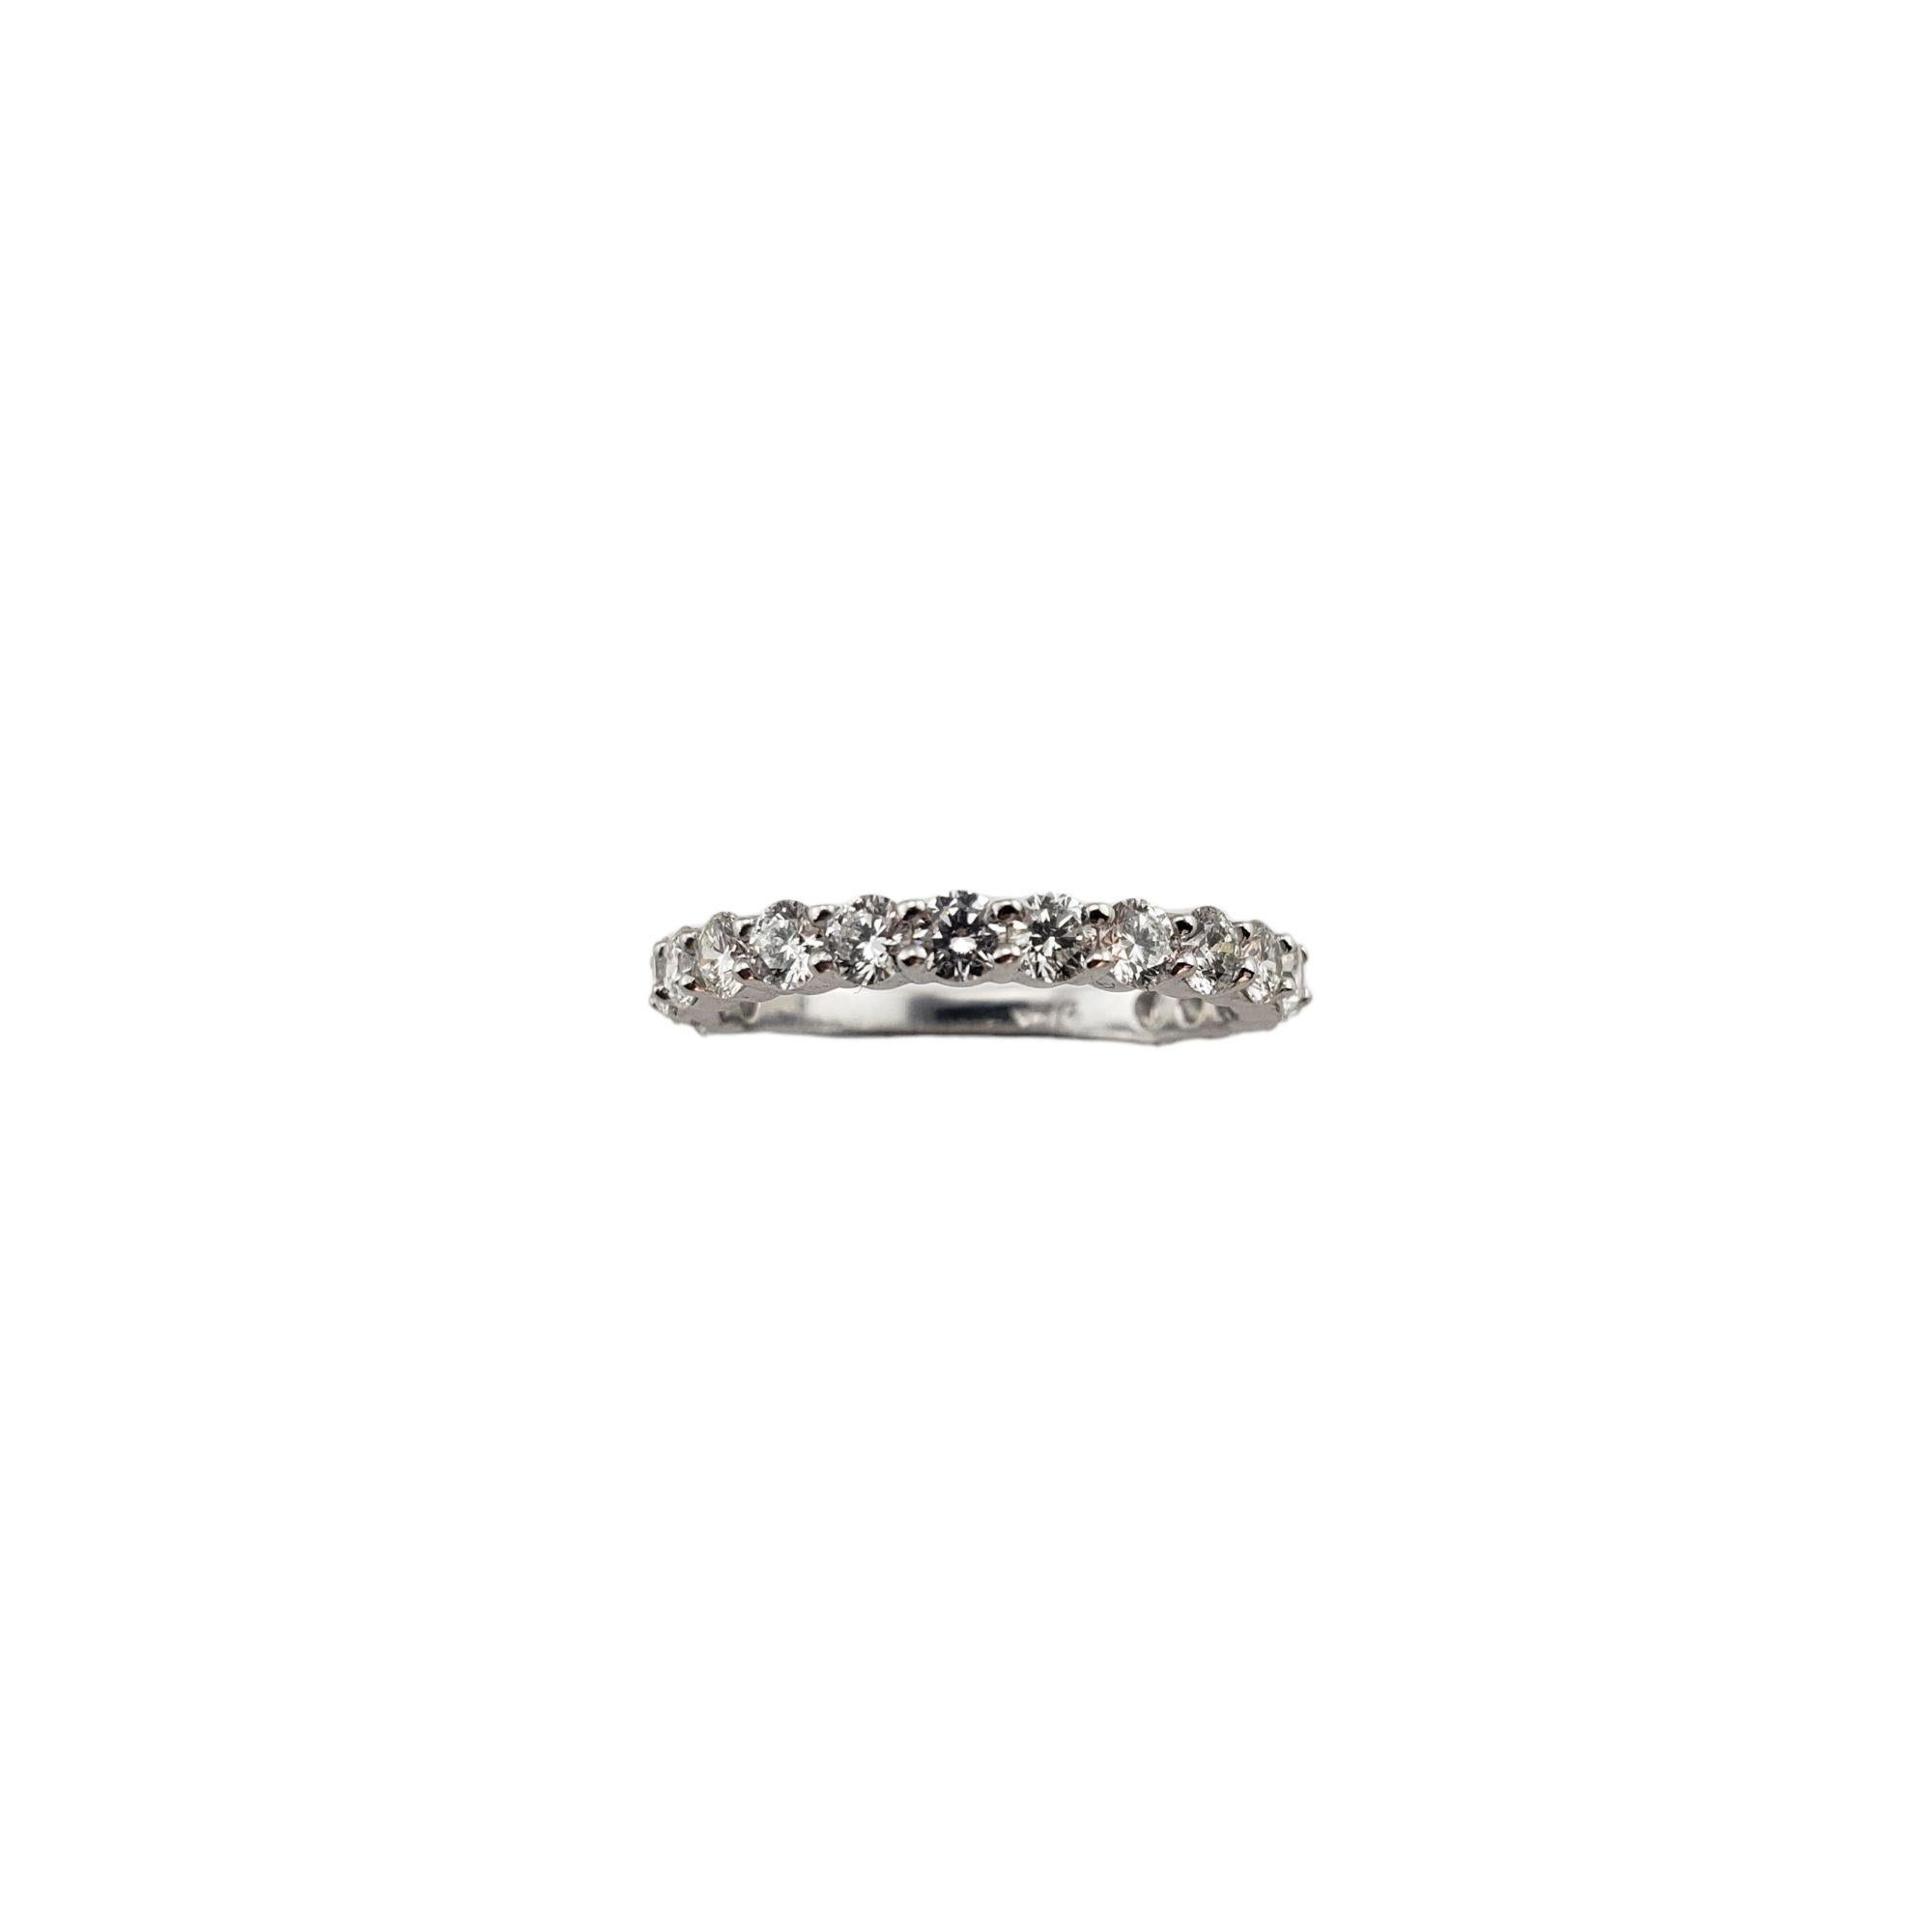 Vintage 14 Karat White Gold and Diamond Band Ring Size 5.75-

This sparkling band features 17 round brilliant cut diamonds* set in classic 14K white gold. Width: 2 mm.

* Chip noted to one diamond not visible to naked eye.

Approximate total diamond